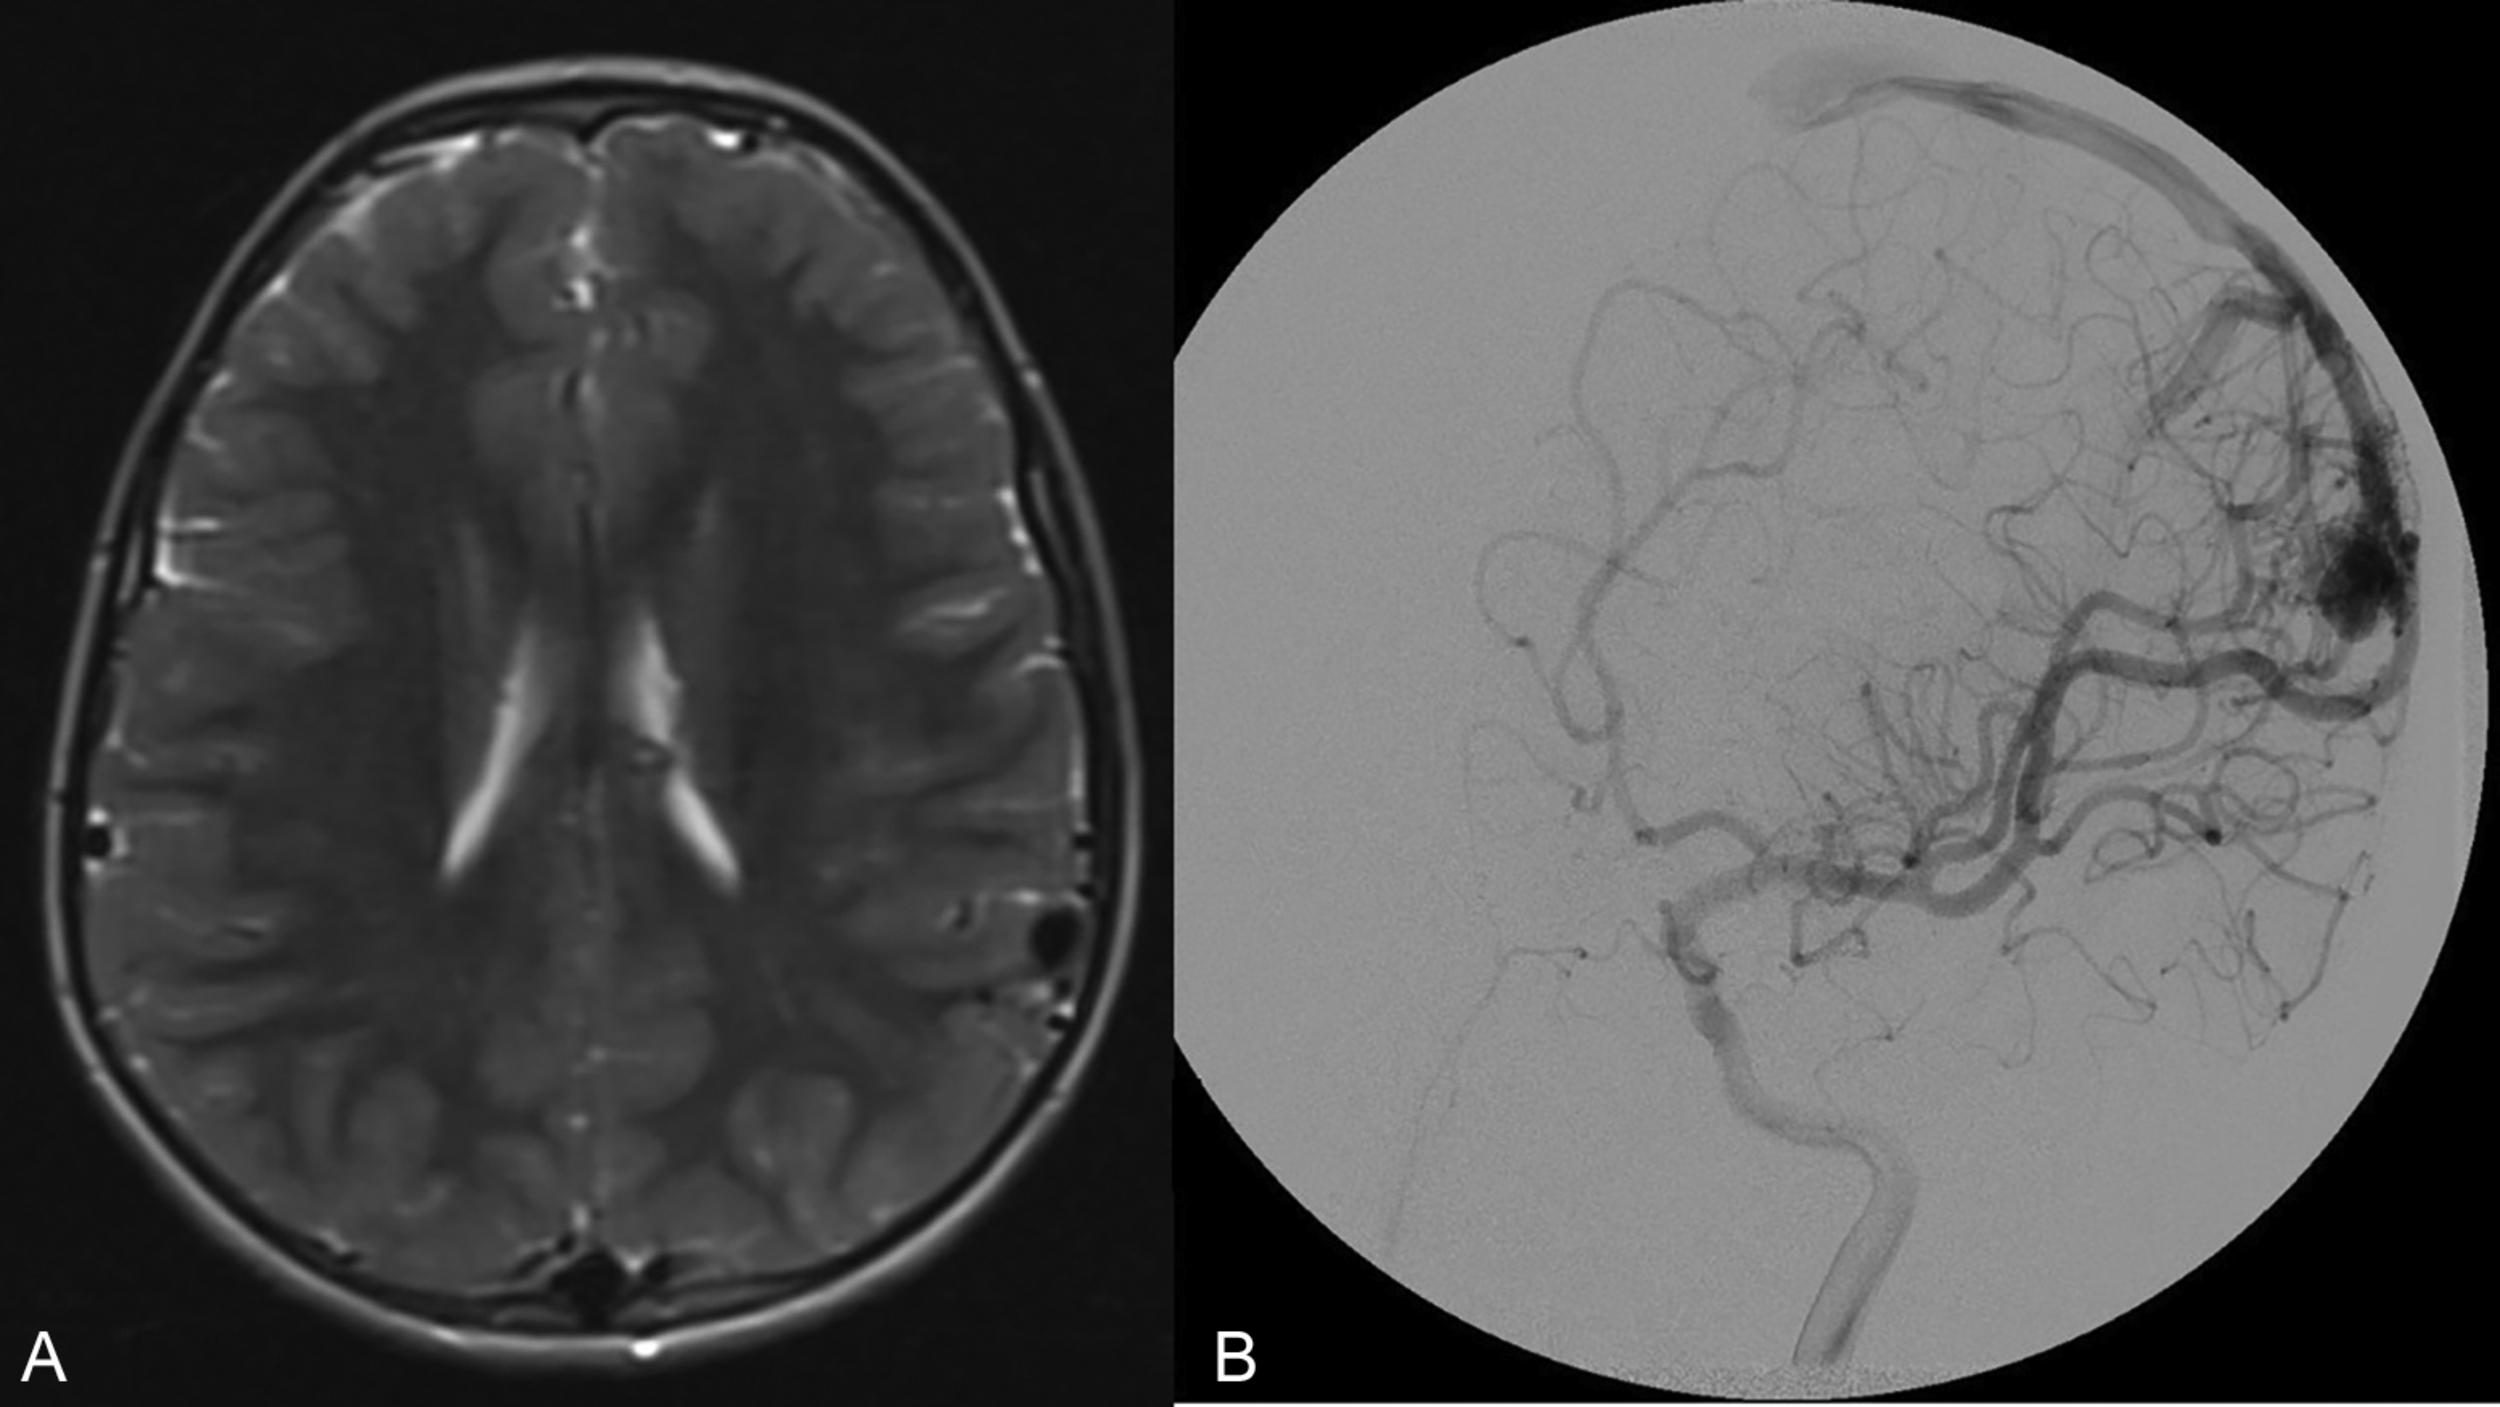 Fig. 19.1, Spetzler-Martin grade I AVM. ( A ) T2-weighted MR image and ( B ) lateral digital subtraction angiogram demonstrating a Spetzler-Martin grade I AVM with a small (< 3 cm) nidus in a superficial, noneloquent location with superficial venous drainage.